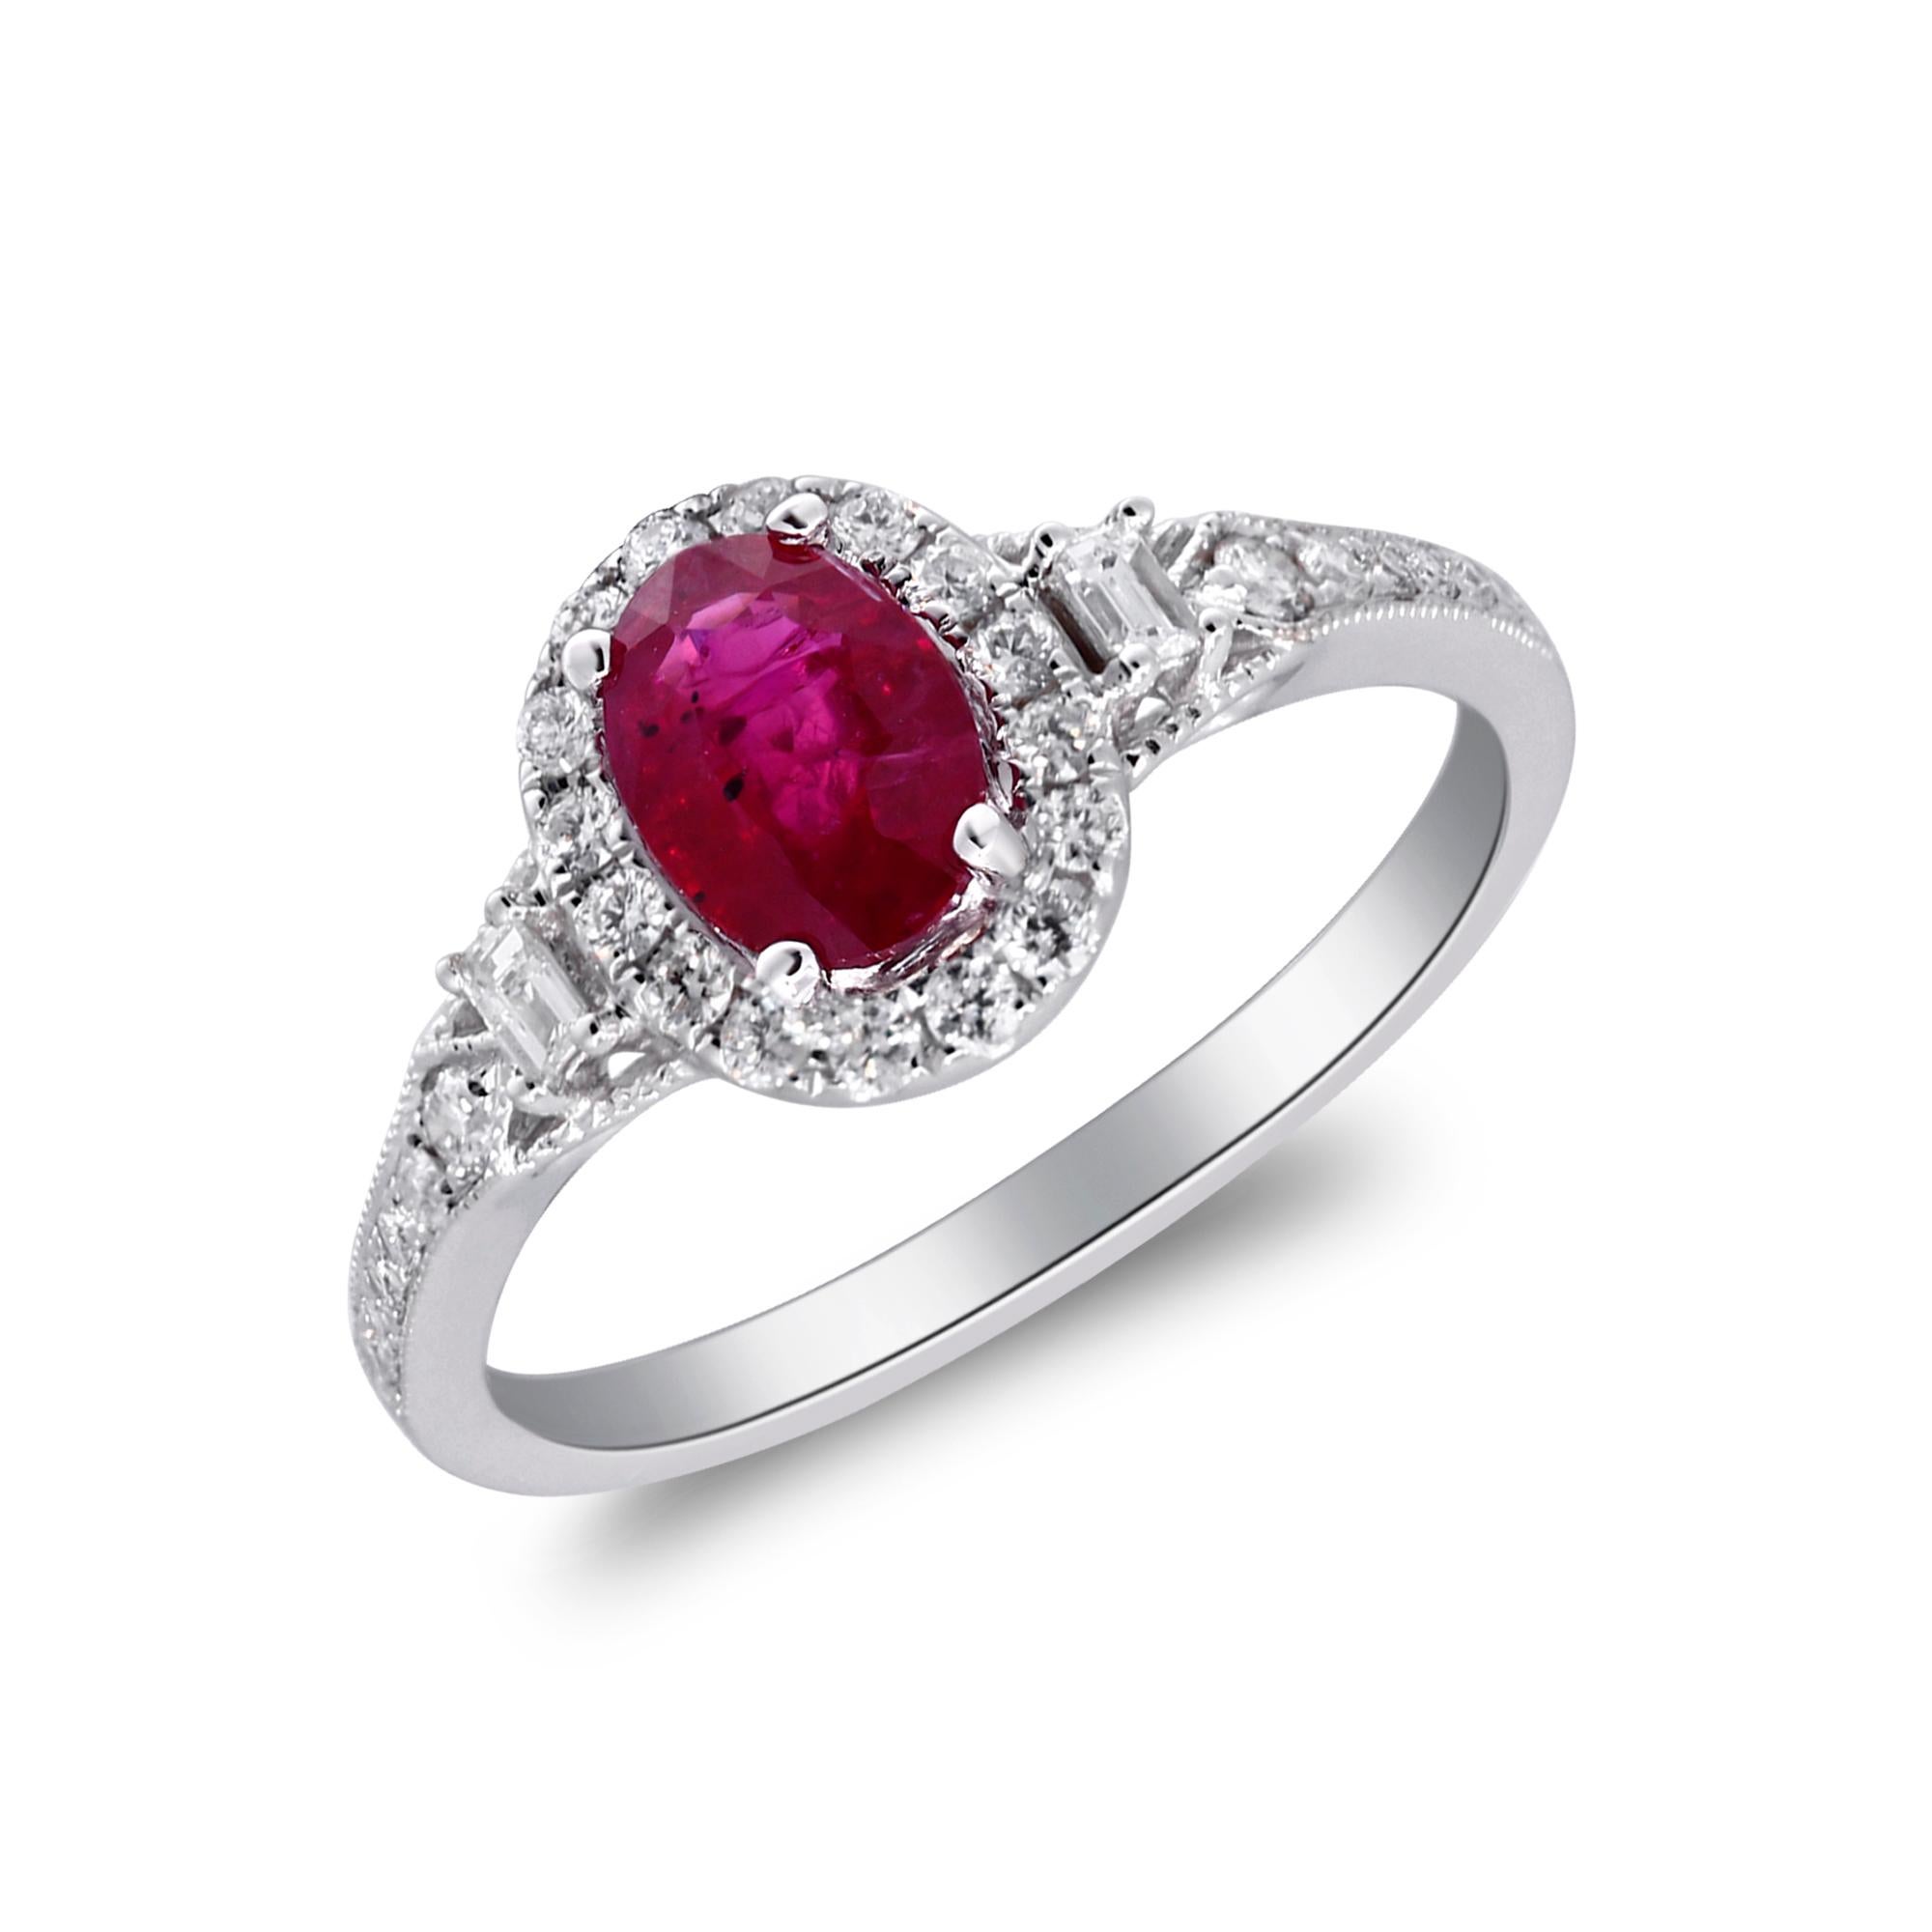 Decorate yourself in elegance with this Ring is crafted from 14-karat White Gold by Gin & Grace. This Ring is made up of Oval-Cut Ruby (1 pcs) 0.98 carat and Round-cut White Diamond (28 Pcs) 0.24 Carat, Baguette-cut White Diamond (2 pcs) 0.09 carat.